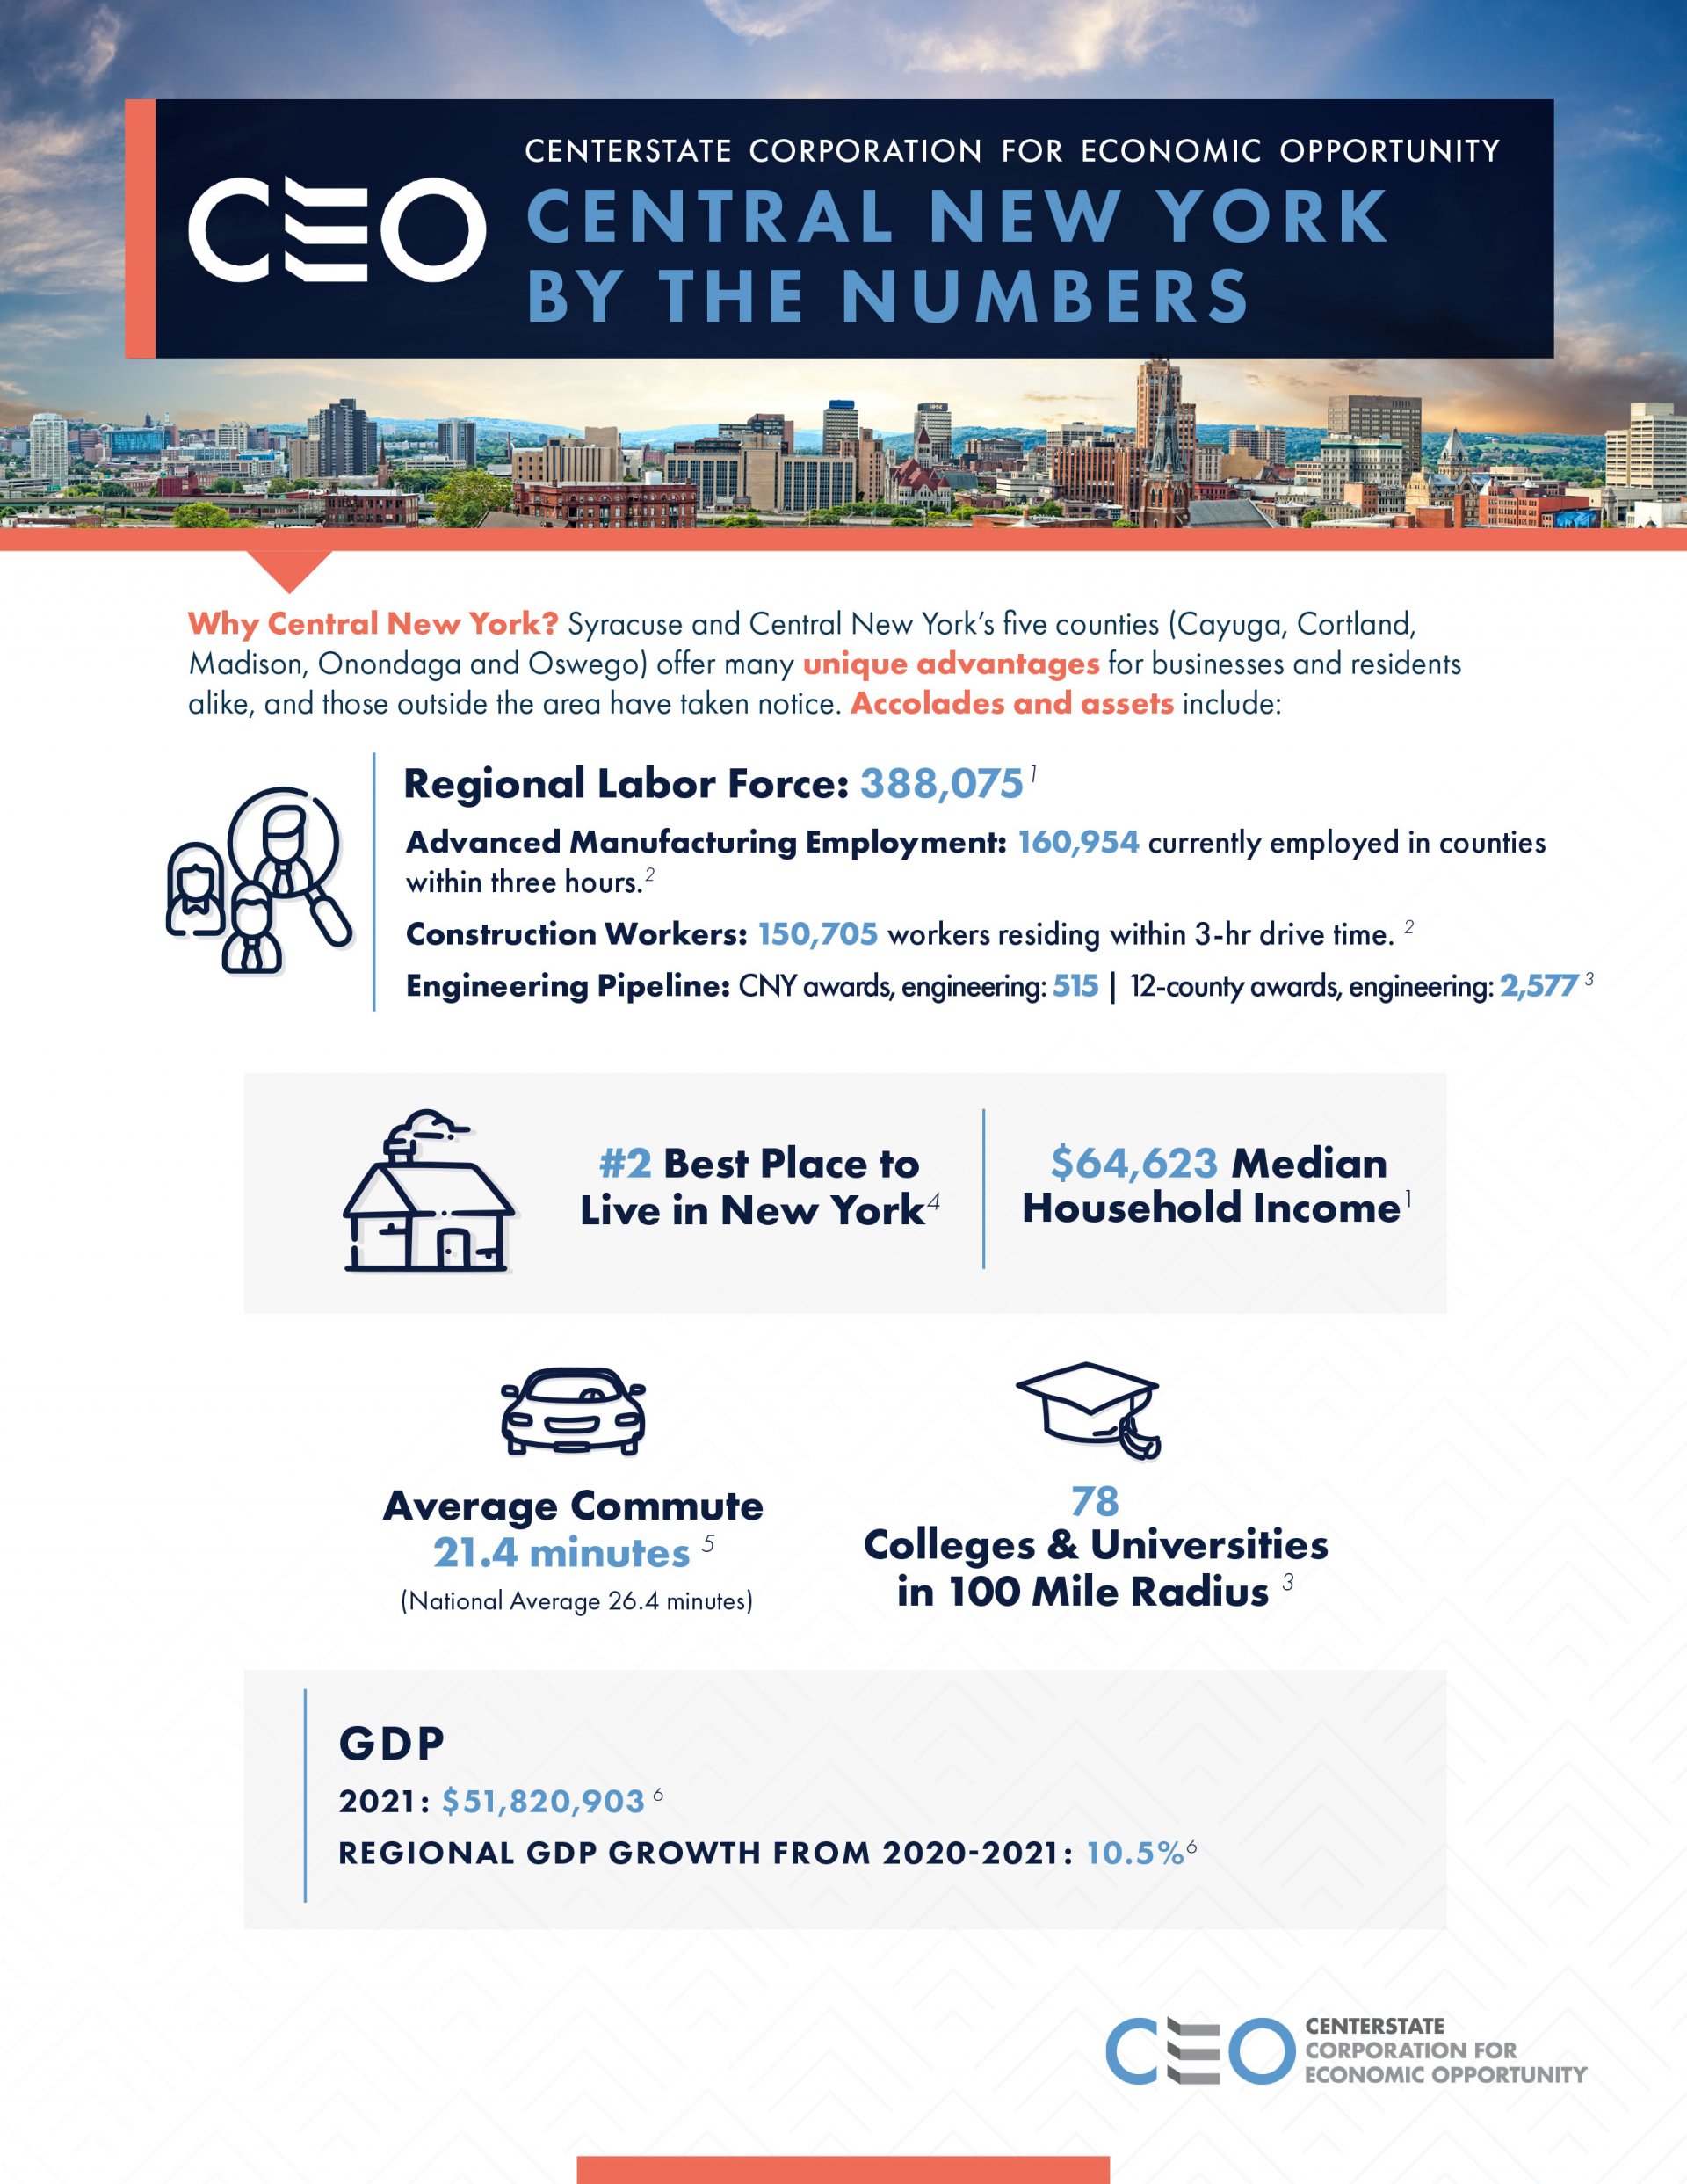 CENTRAL-NEW-YORK-BY-THE-NUMBERS-624